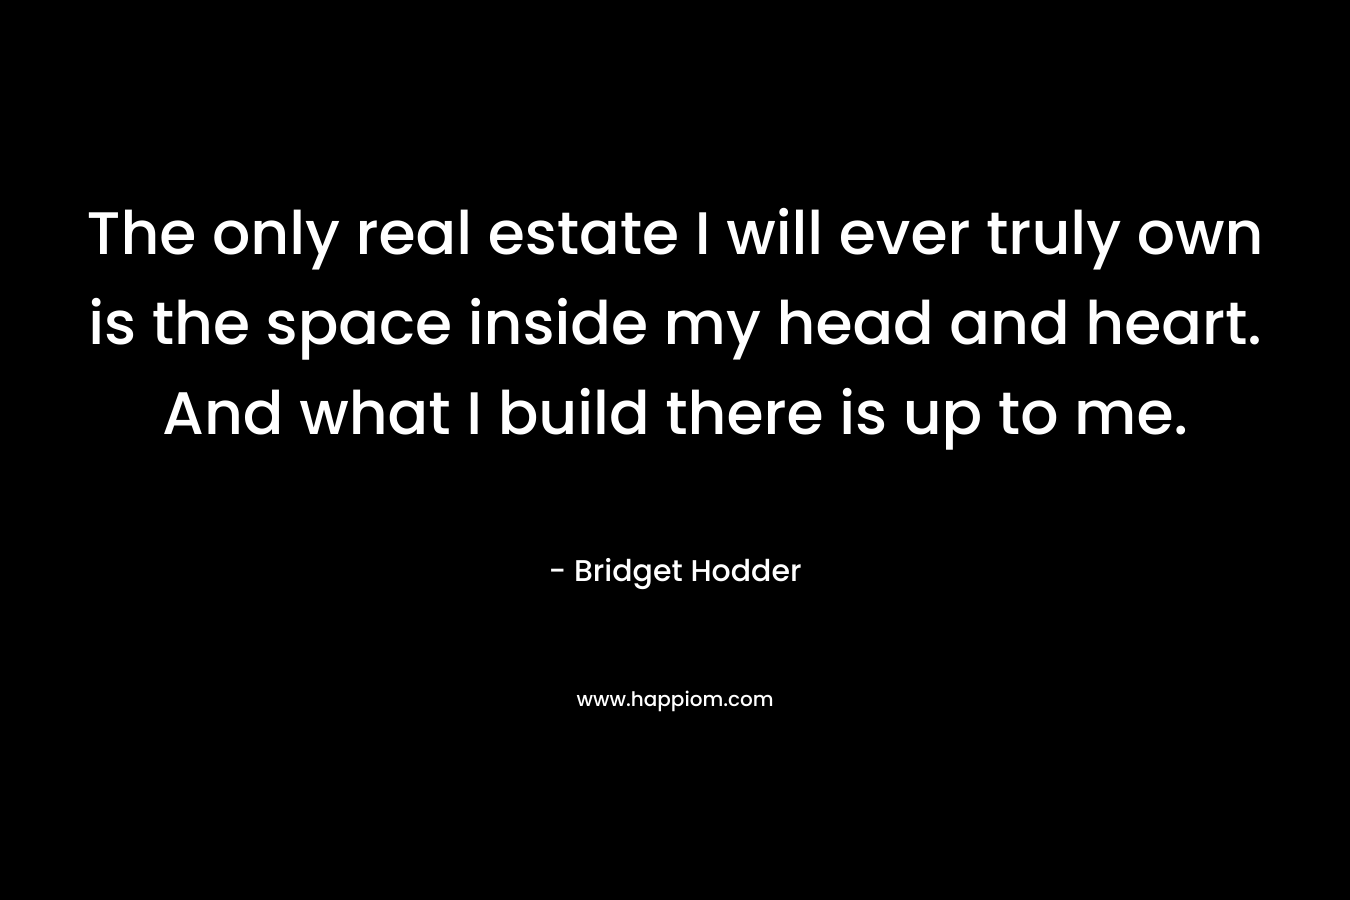 The only real estate I will ever truly own is the space inside my head and heart. And what I build there is up to me. – Bridget Hodder